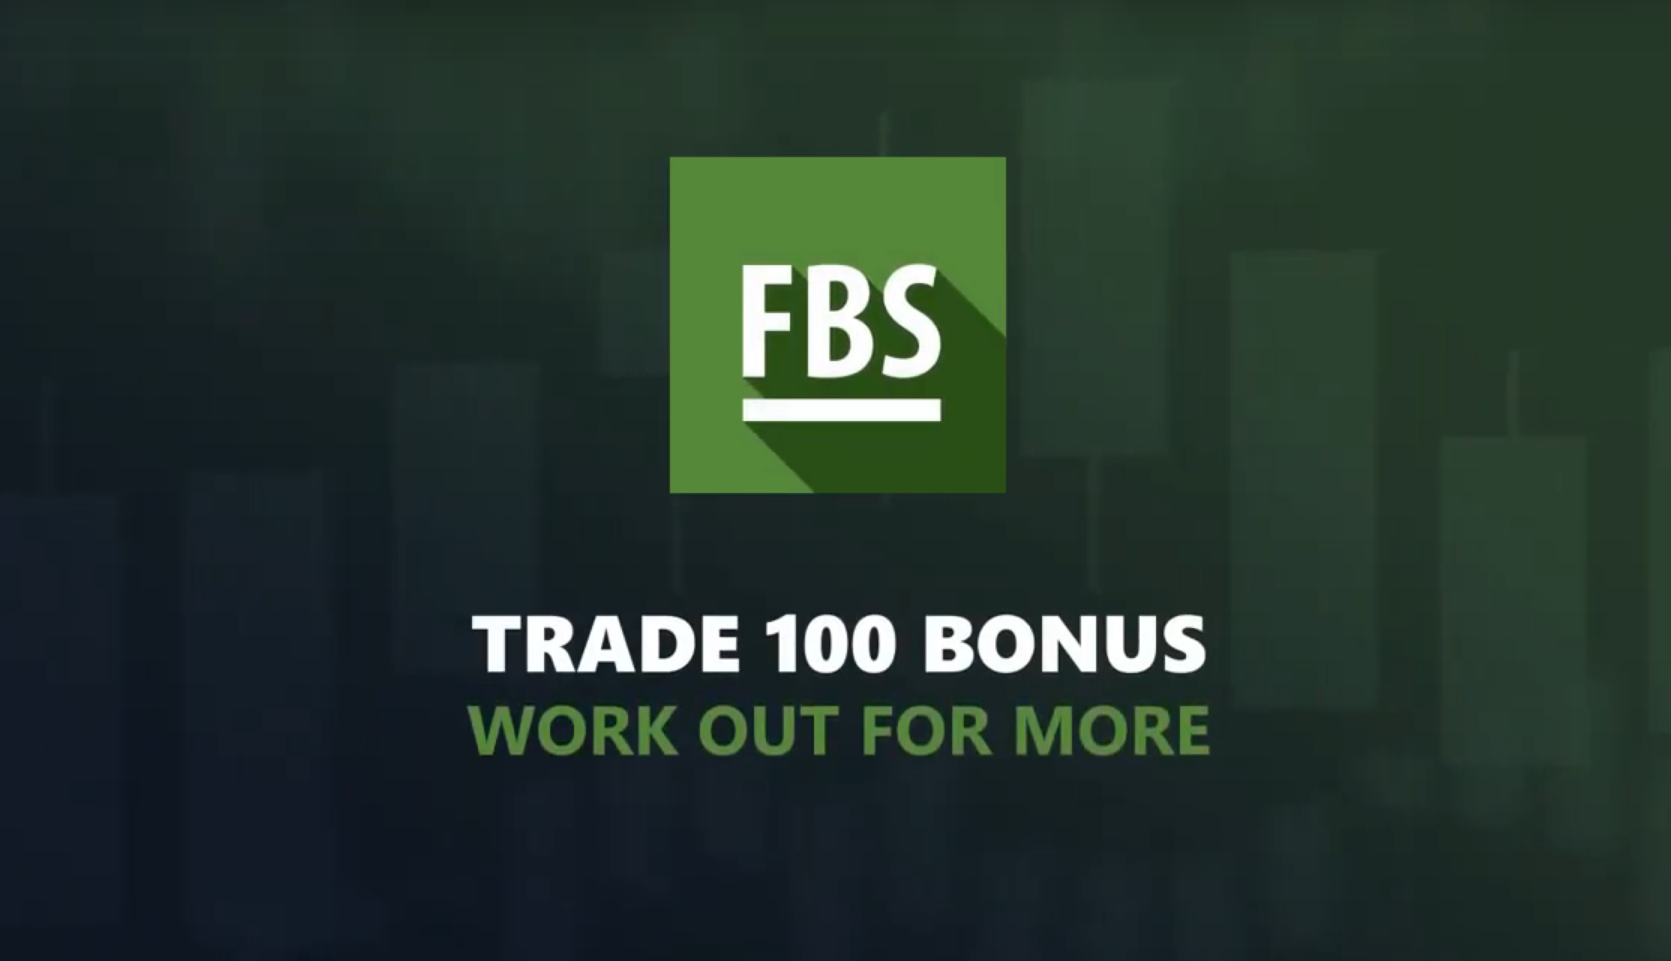 How to trade forex with $100